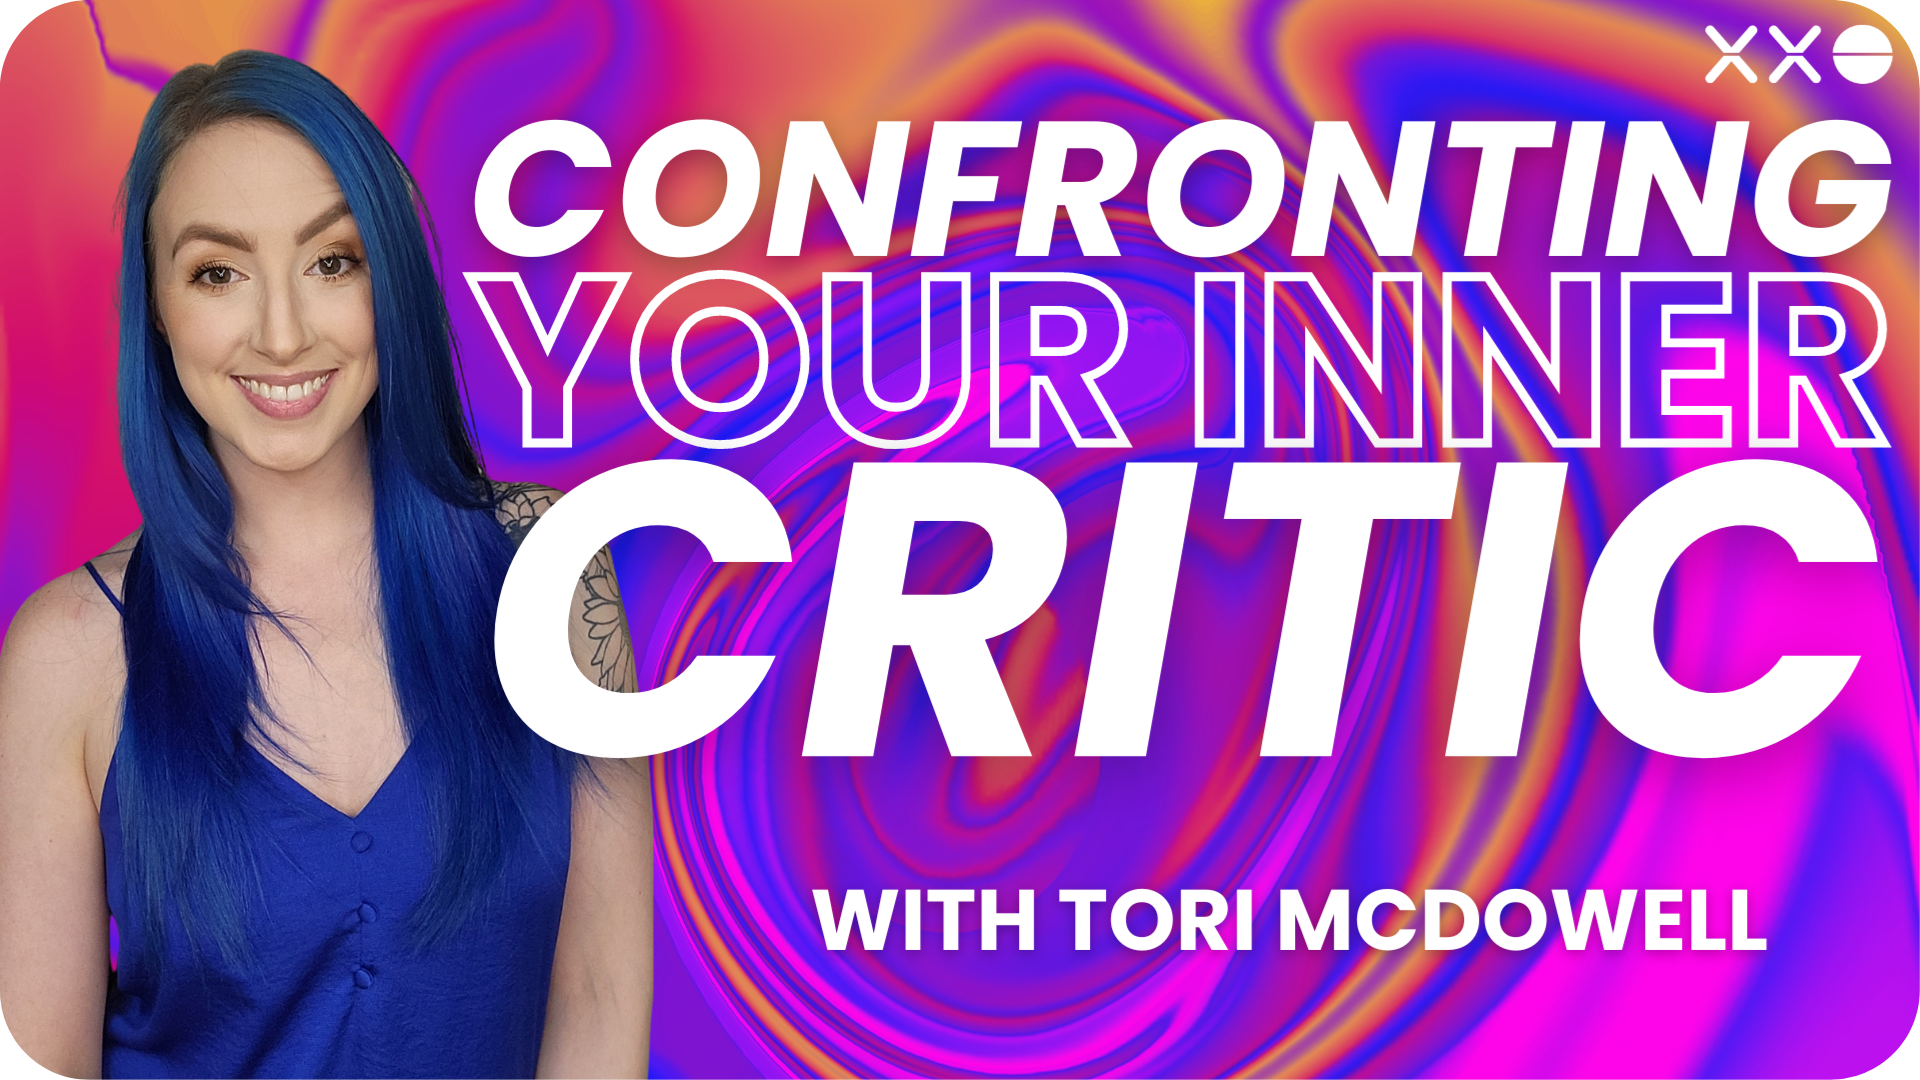 TORI MCDOWELL XXO CONNECT CONFRONTING YOUR INNER CRITIC WHOLE HUMAN CONNECTION EXPERIENCE.png